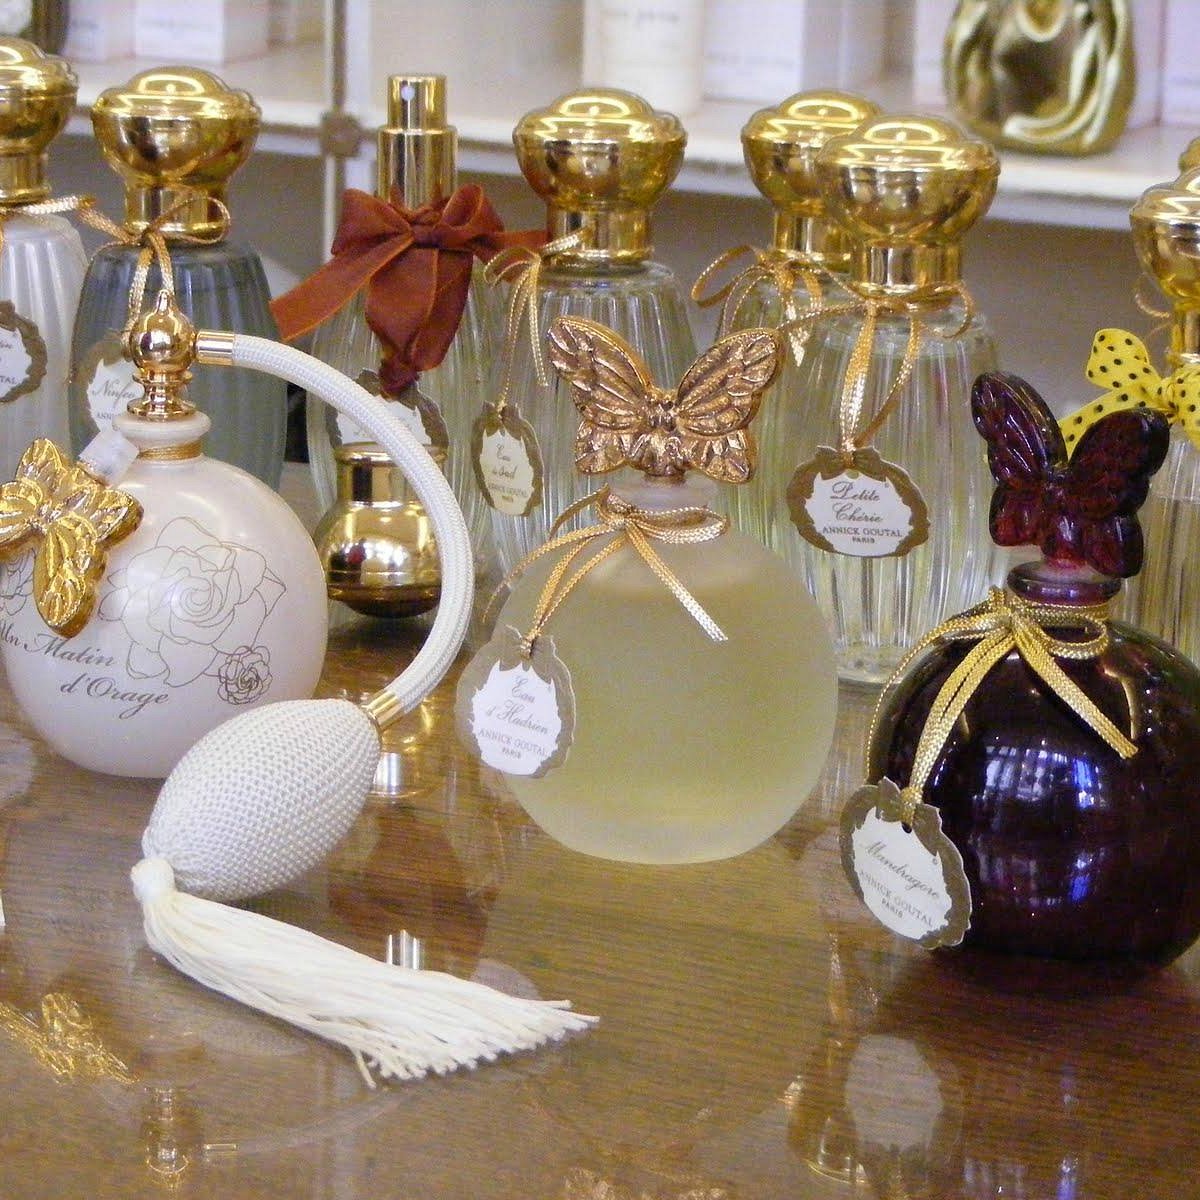 Annick Goutal - All You Need to Know BEFORE You Go (with Photos)